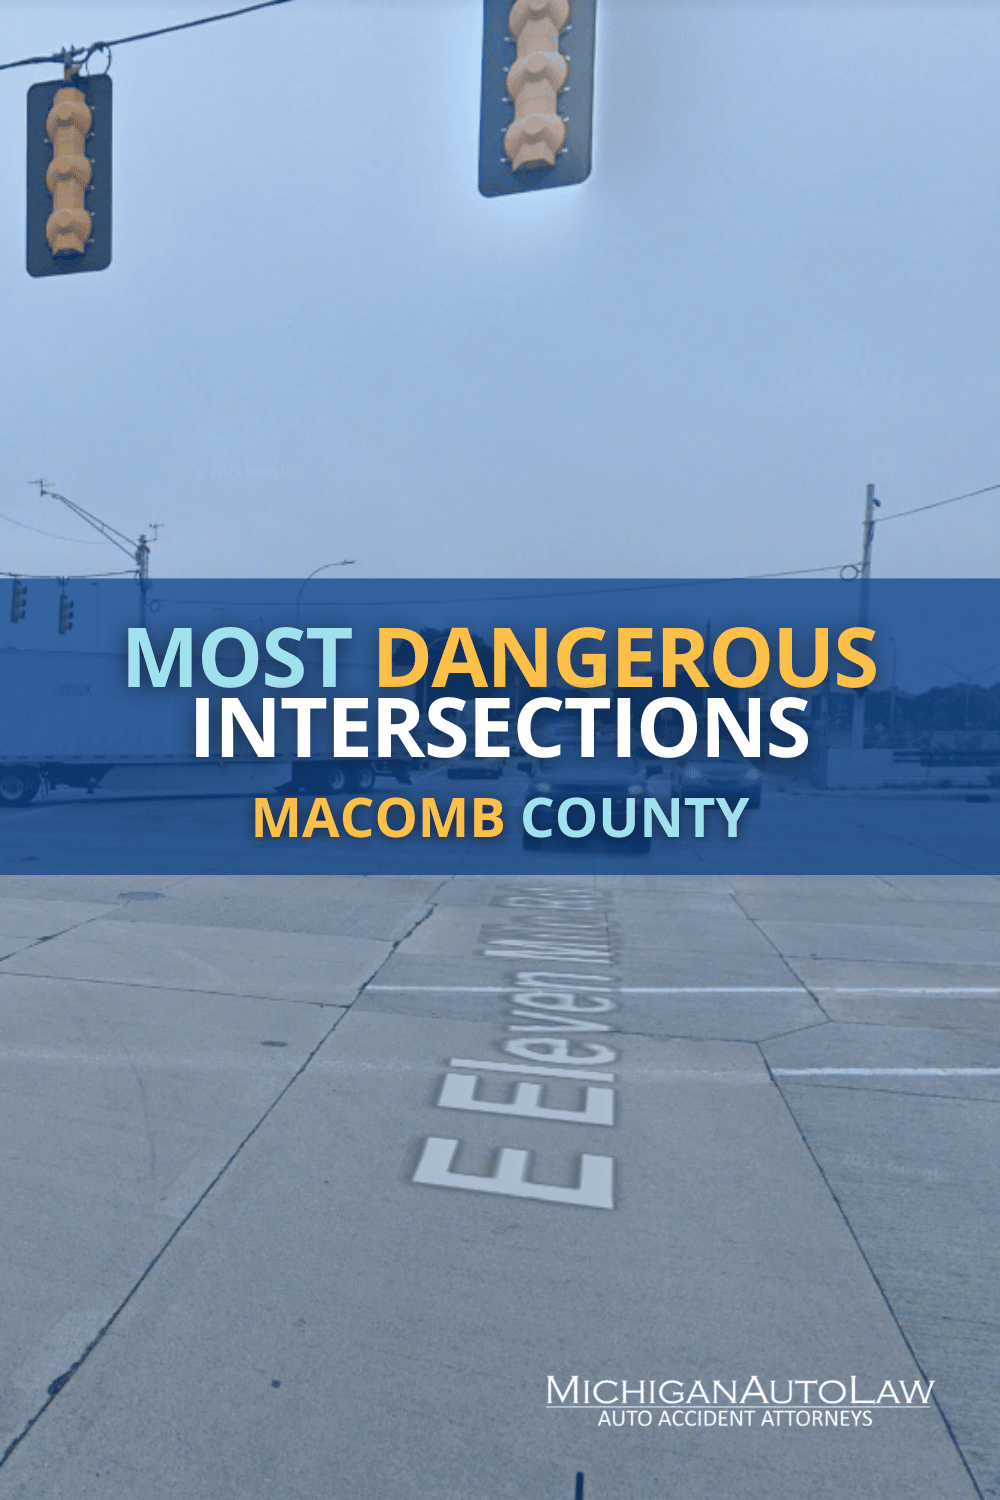 Macomb County’s Most Dangerous Intersections in 2021